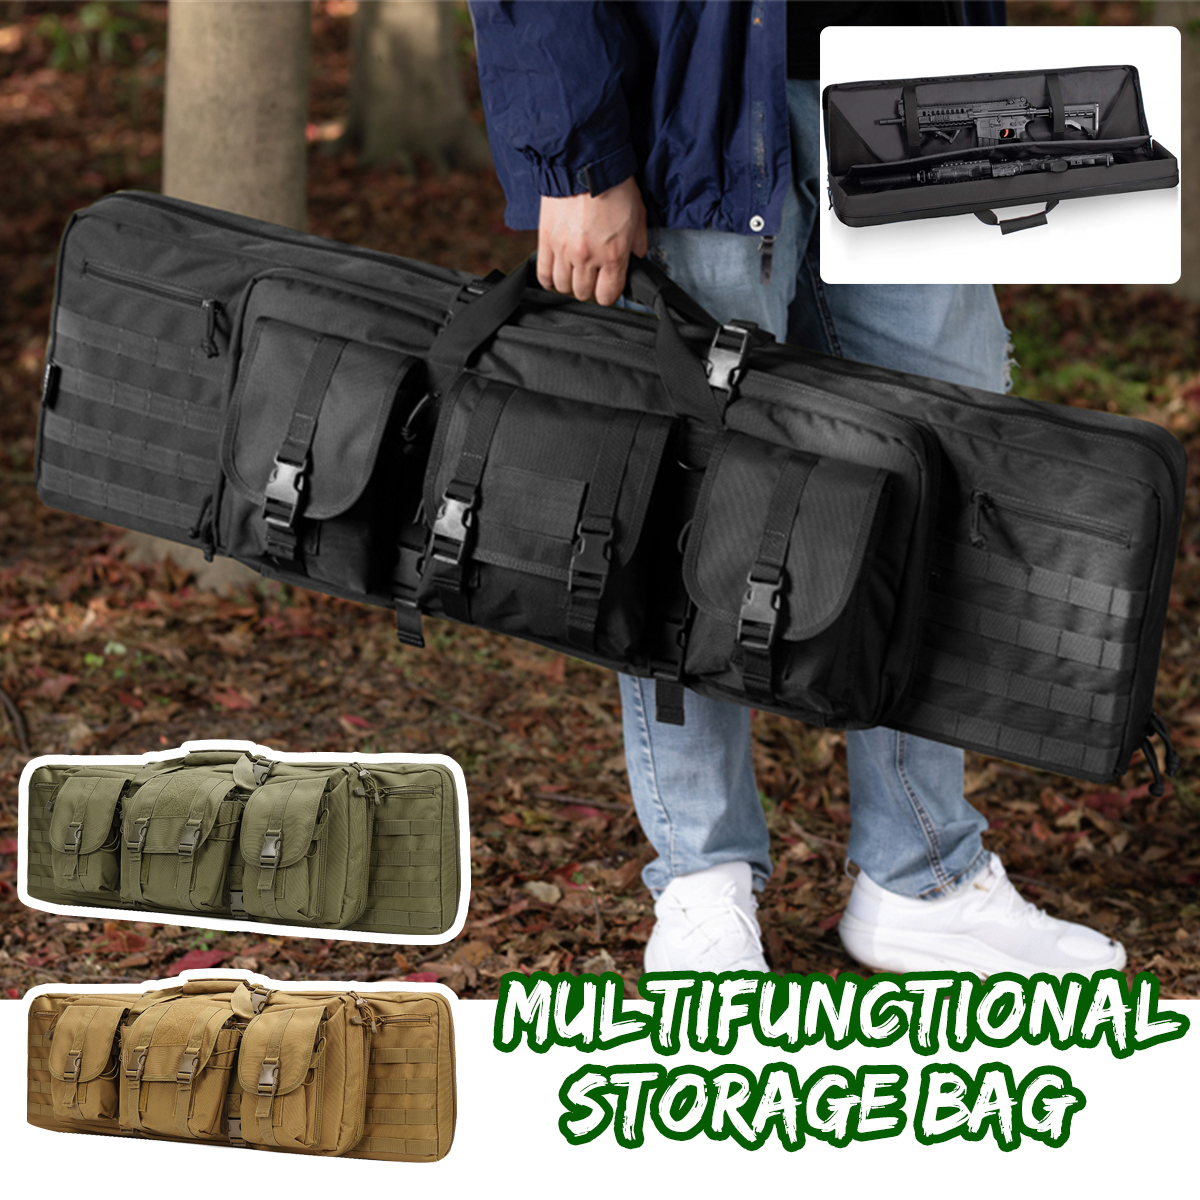 36inch-Tactical-Camouflage-Fishing-Tackle-Camping-Bag-Multifunctional-Storage-Bag-Double-Padded-Back-1853242-2